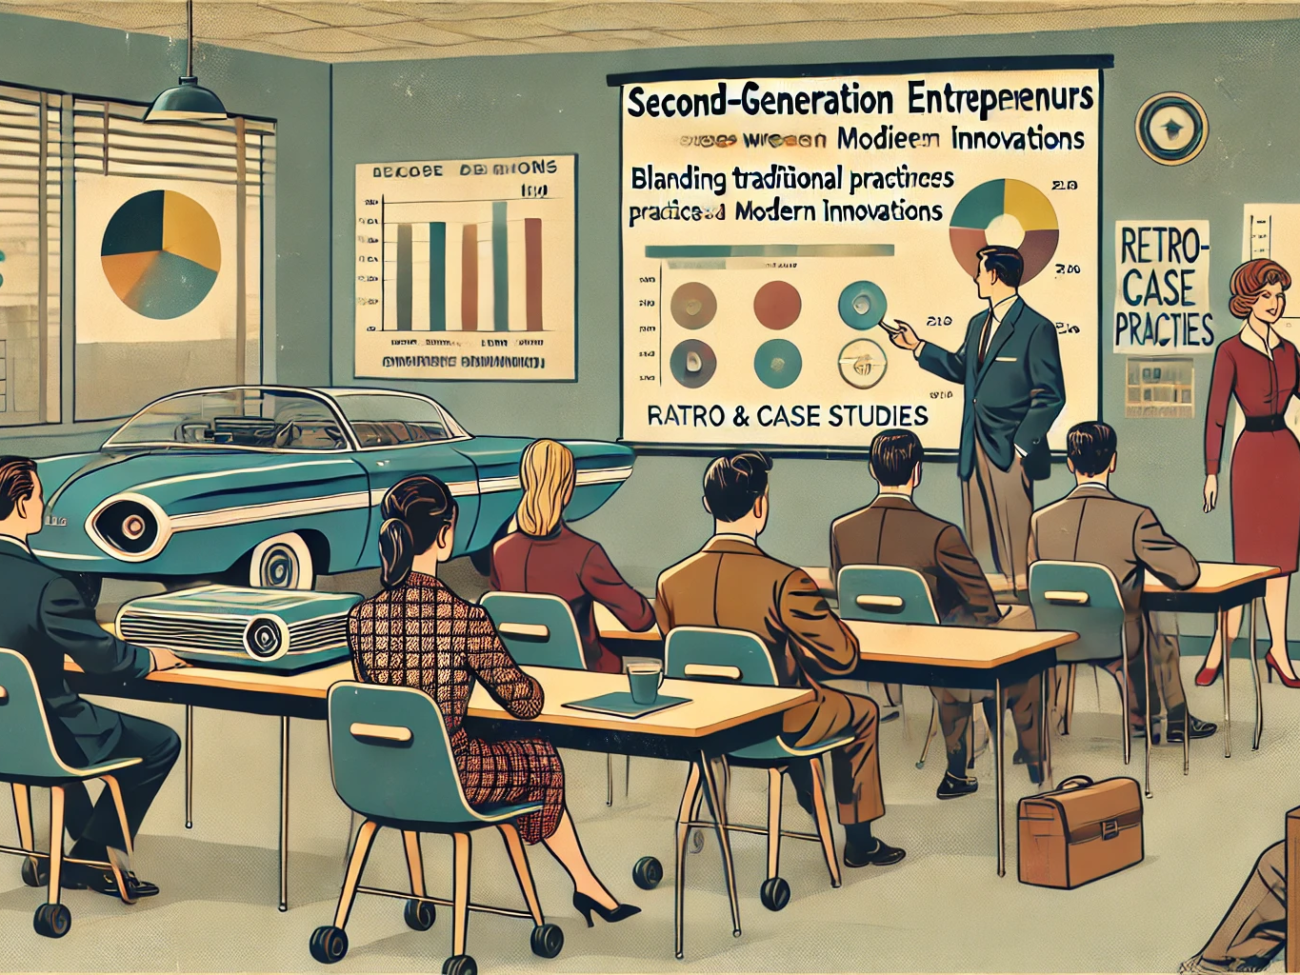 DALL·E 2024-06-28 10.49.56 - A 1960s themed illustration in muted colors showing a classroom where second-generation entrepreneurs are learning. The classroom features mid-century